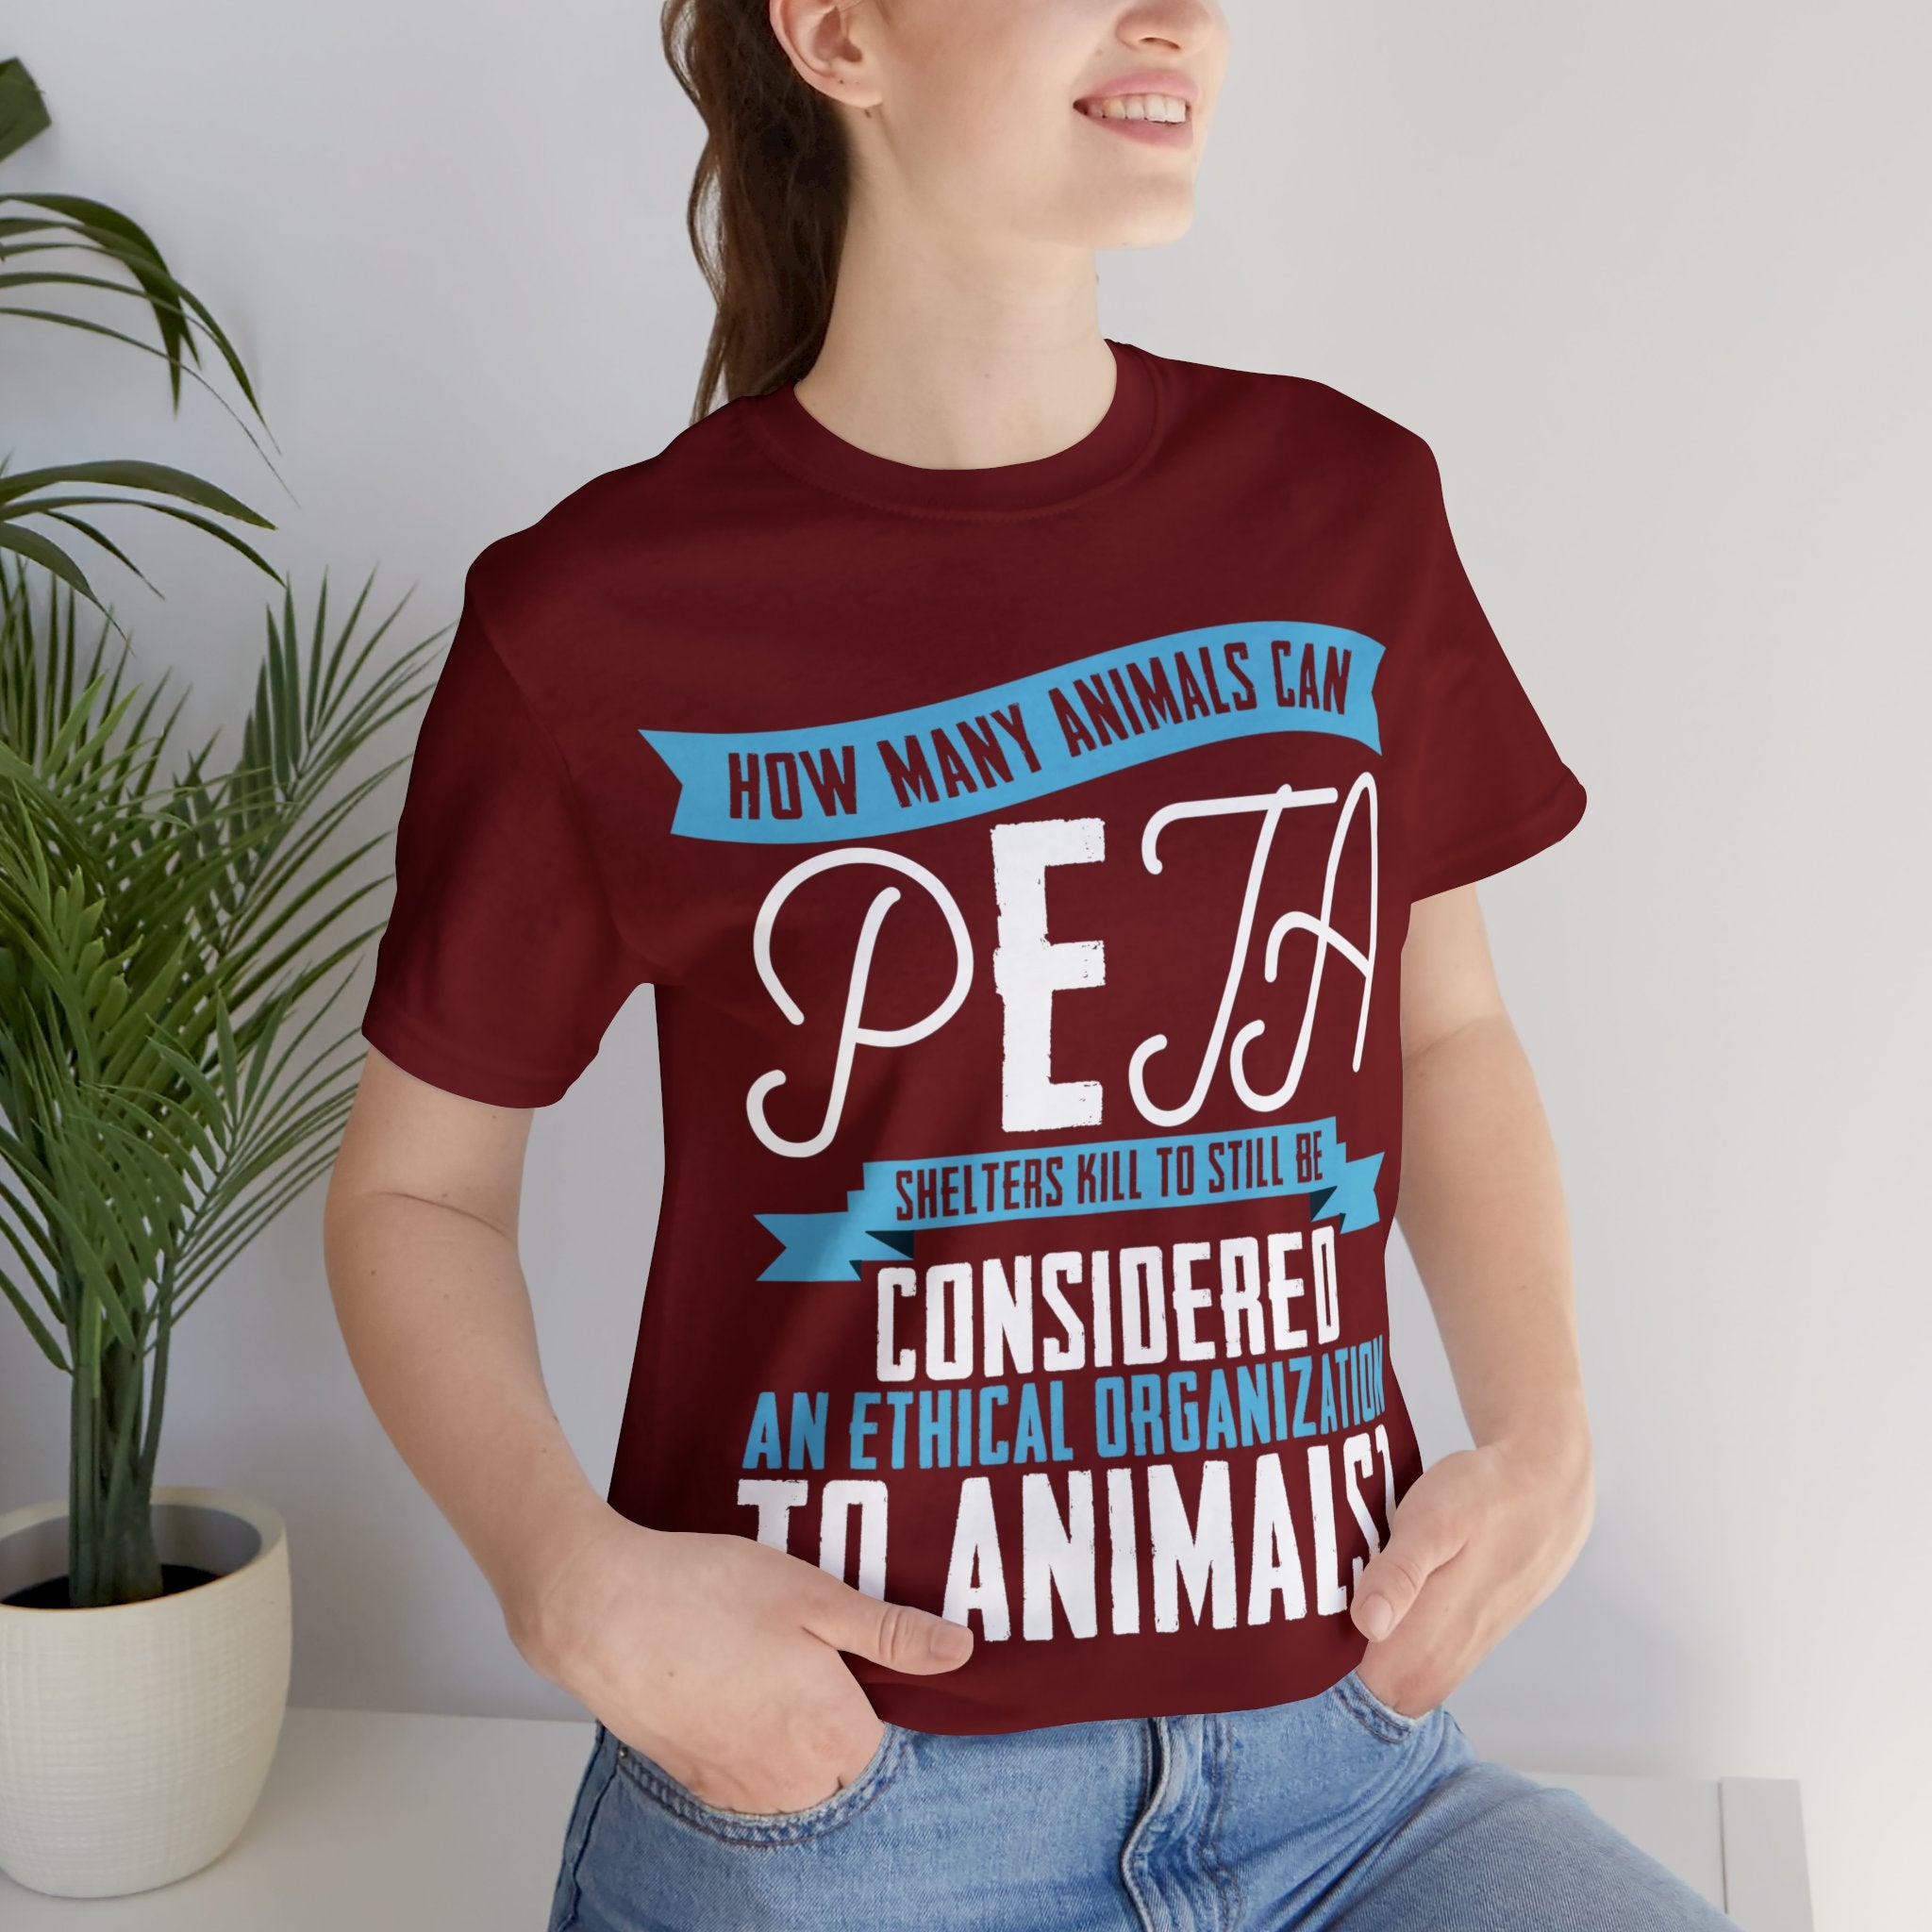 An Ethical Organization to Animals?